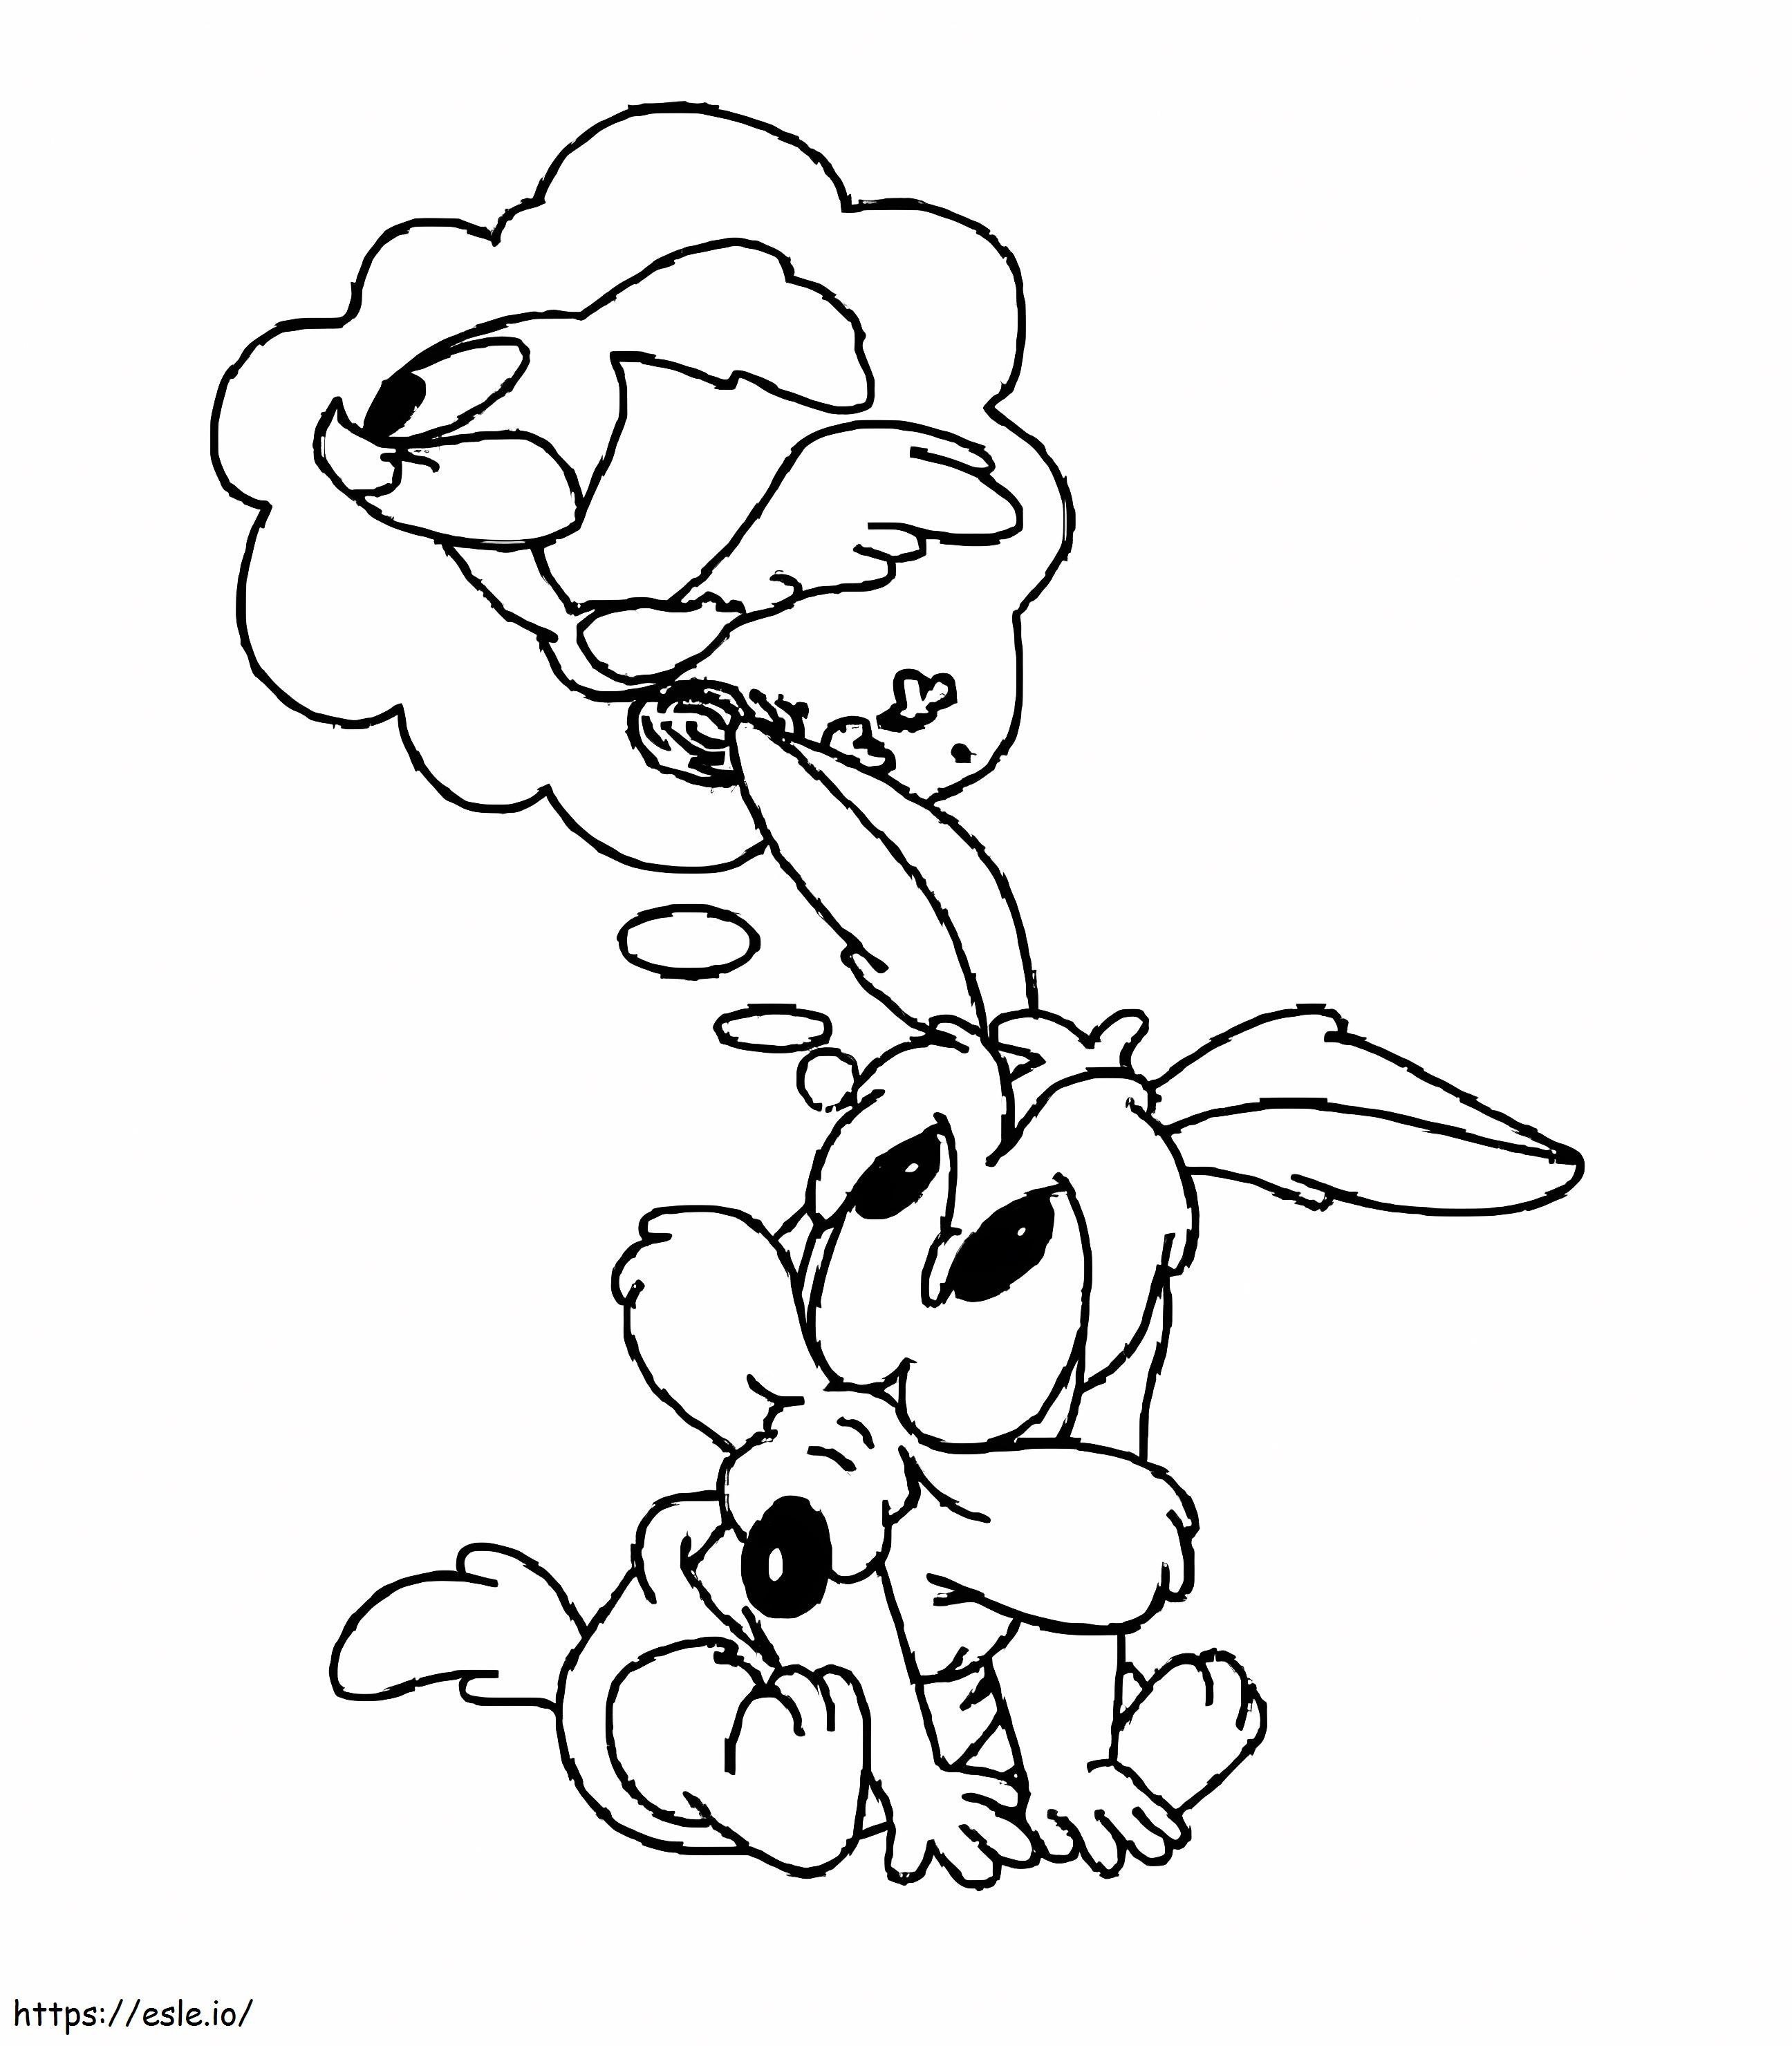 Baby RoadRunner And Baby Wile E. Coyote Cute coloring page